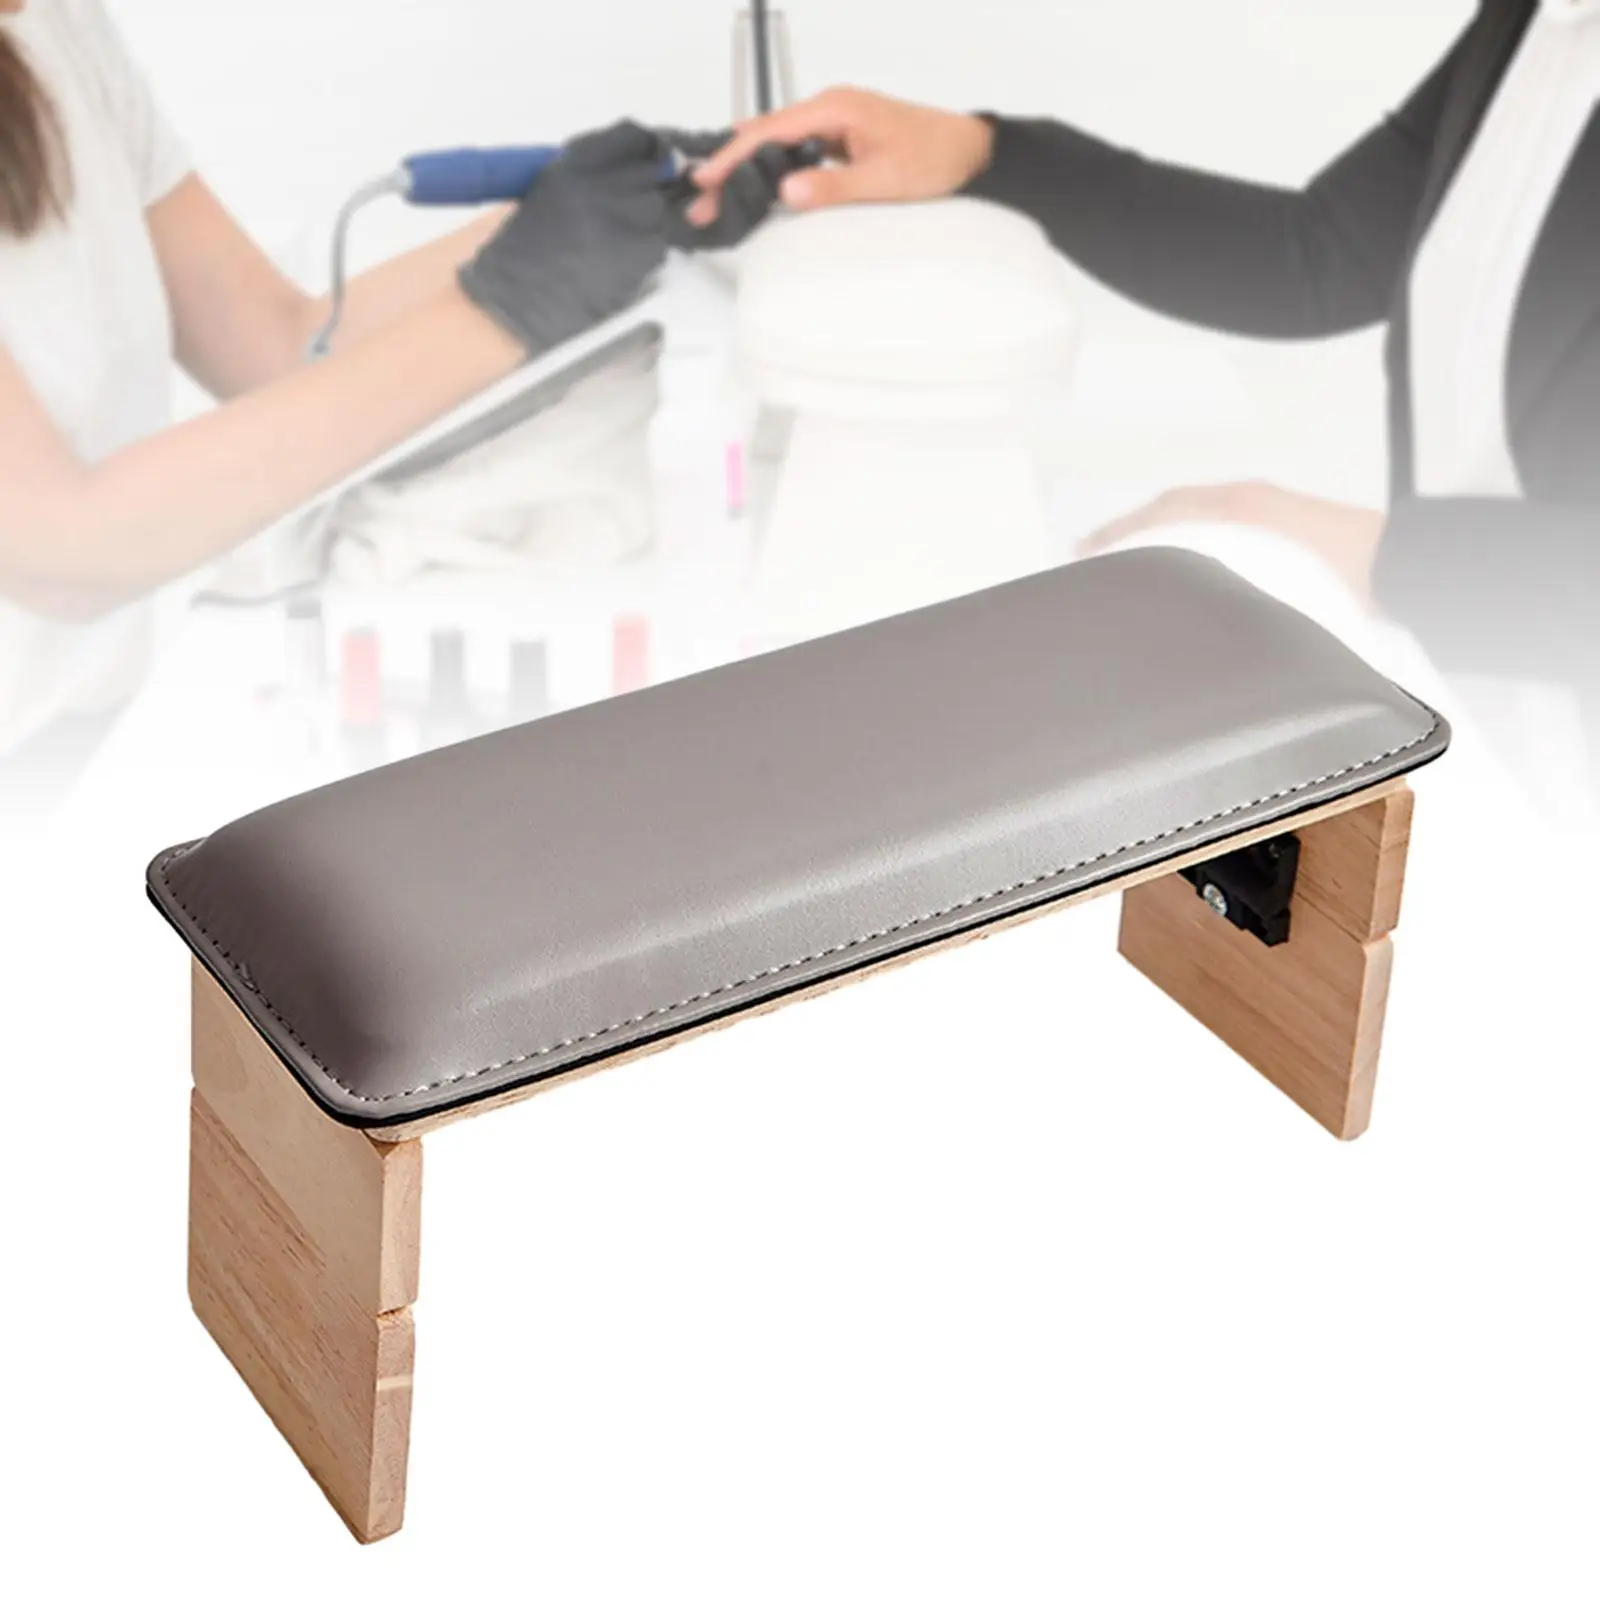 Nail Arm Rest Nail Art Accessories Tool Non Slip Foldable Hand Rest with Soft Cushion for Foot Nail Manicure Table Nail Art